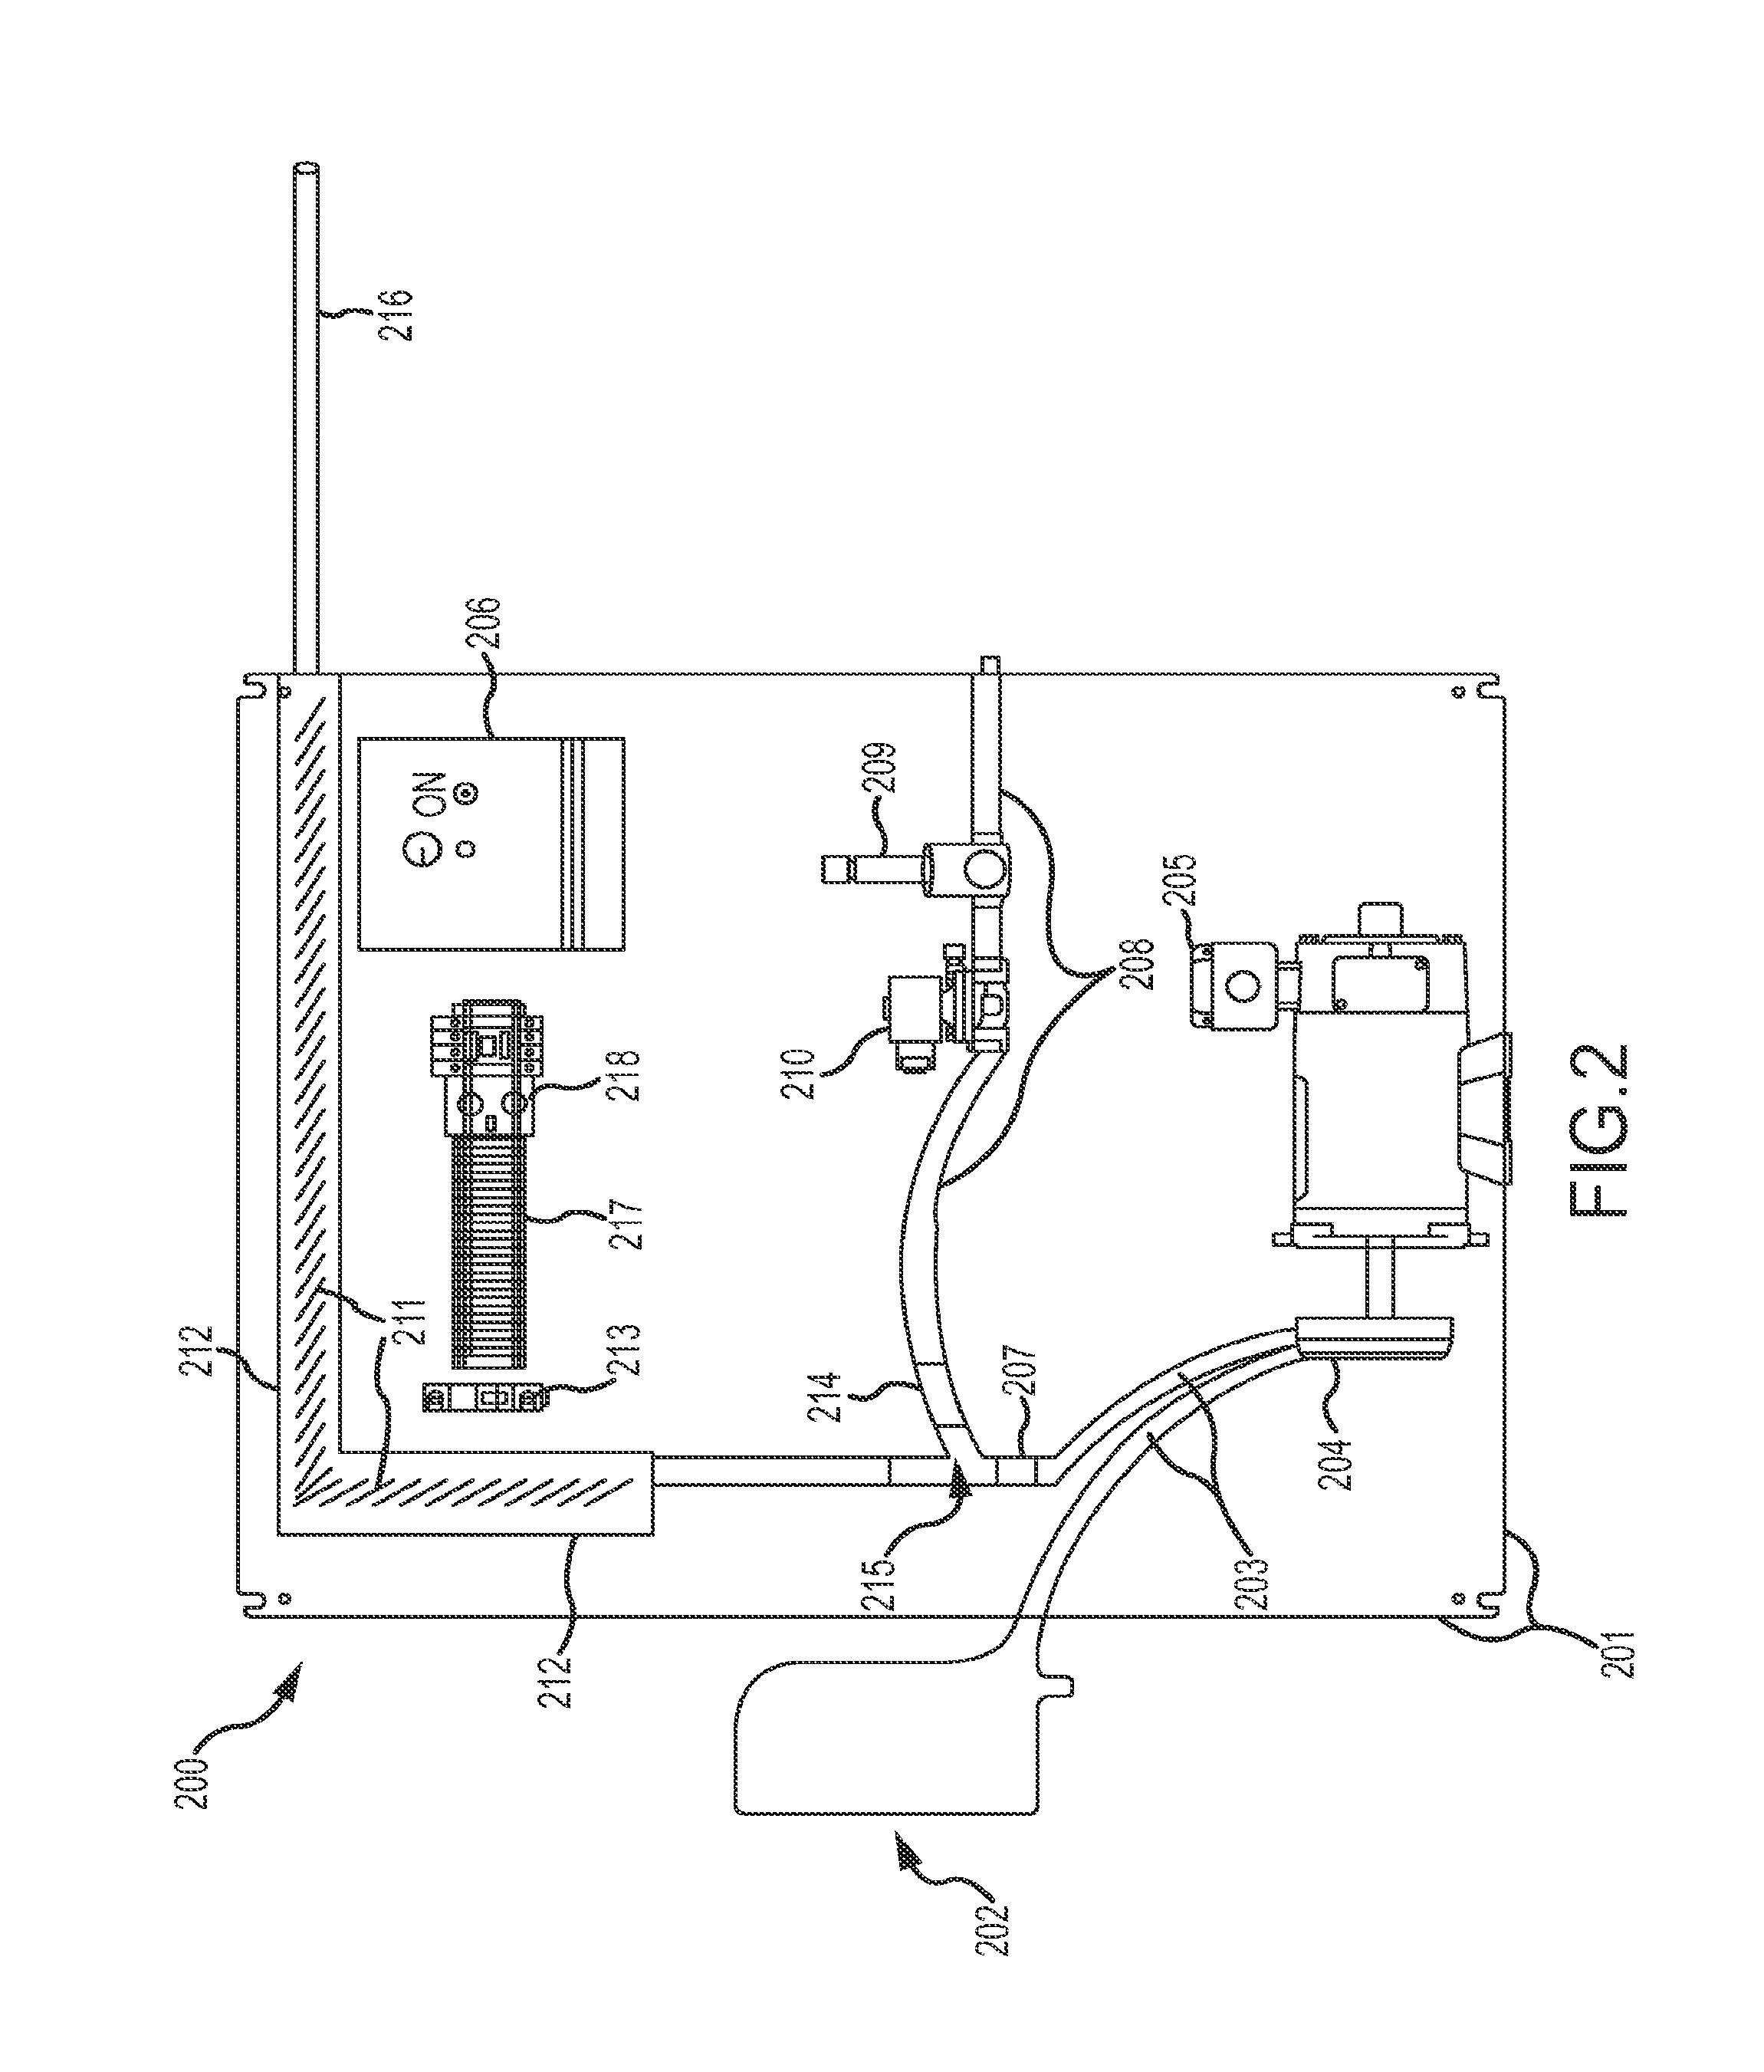 System, method and apparatus for manufacturing stable cement slurry for downhole injection